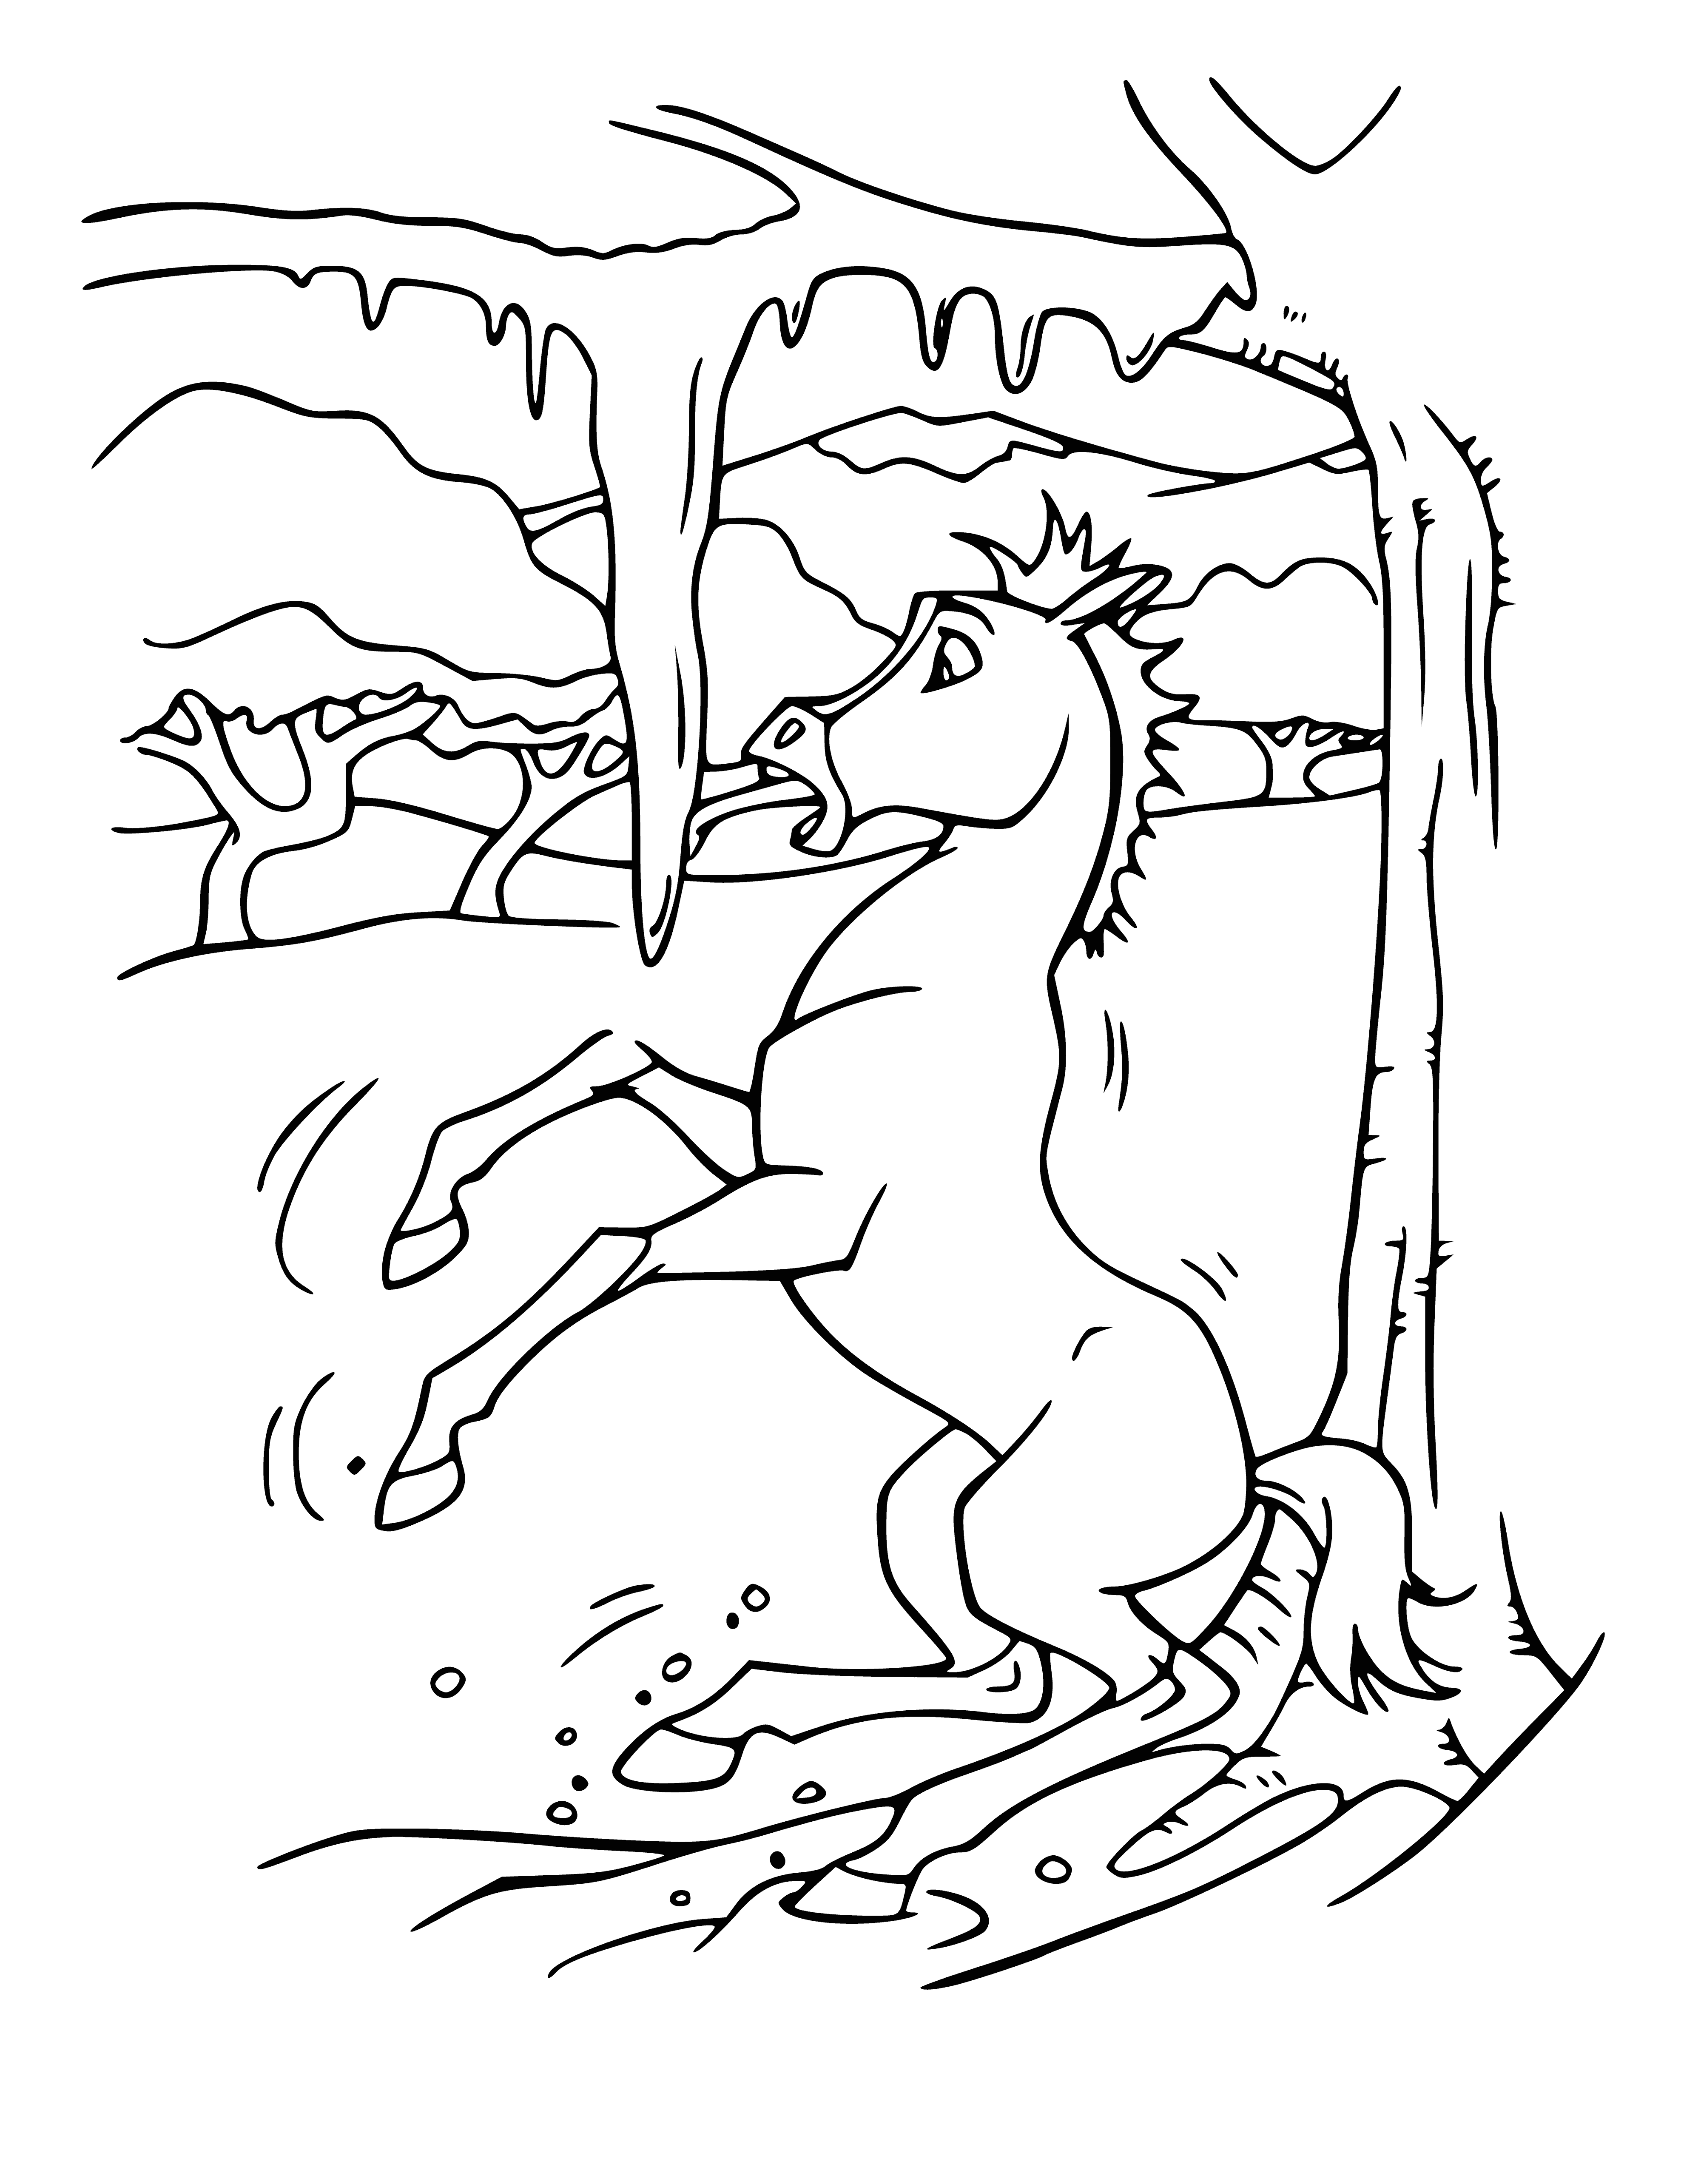 Spirit's first winter coloring page